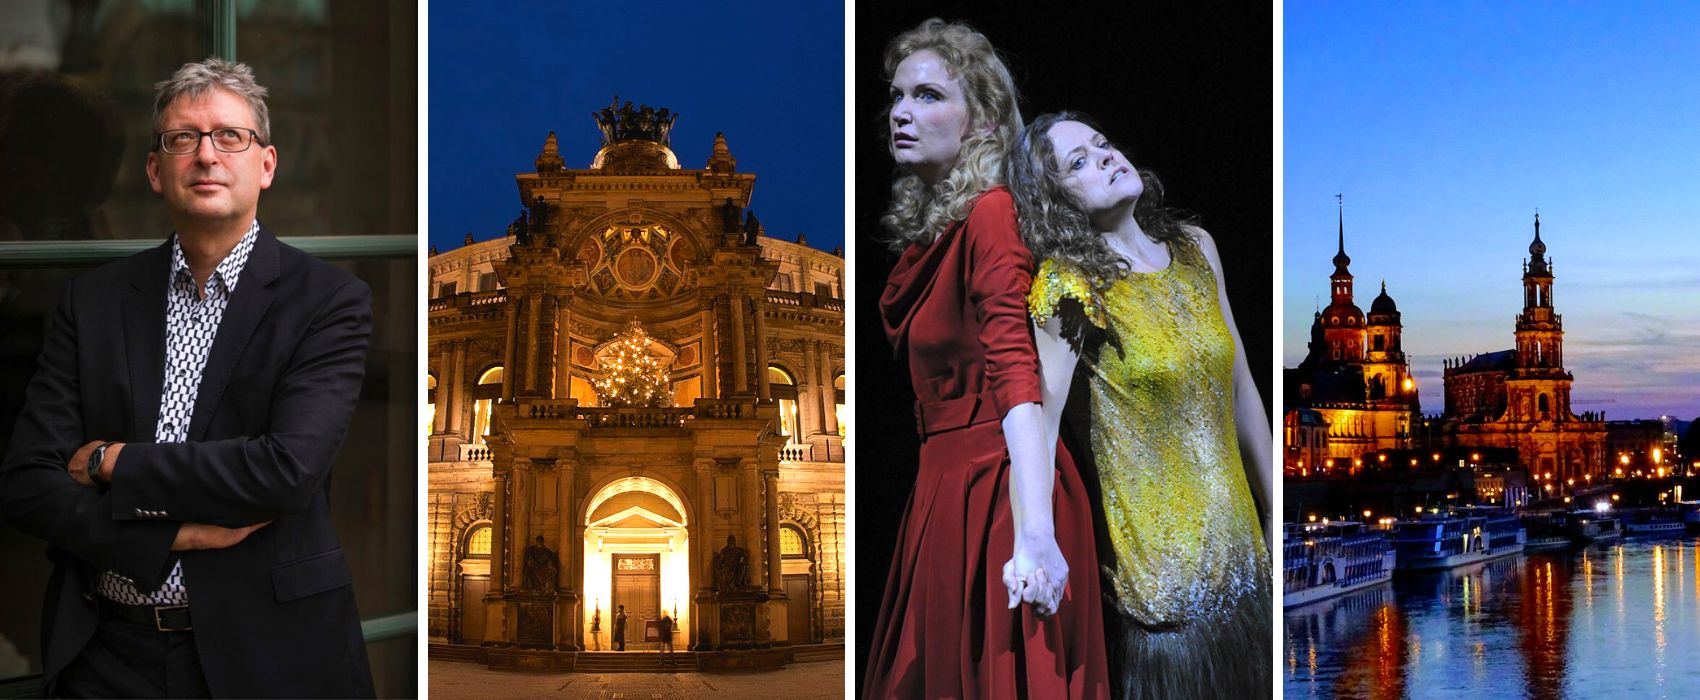 Dresden from 29/03 to 02/04: Richard Strauss at home!